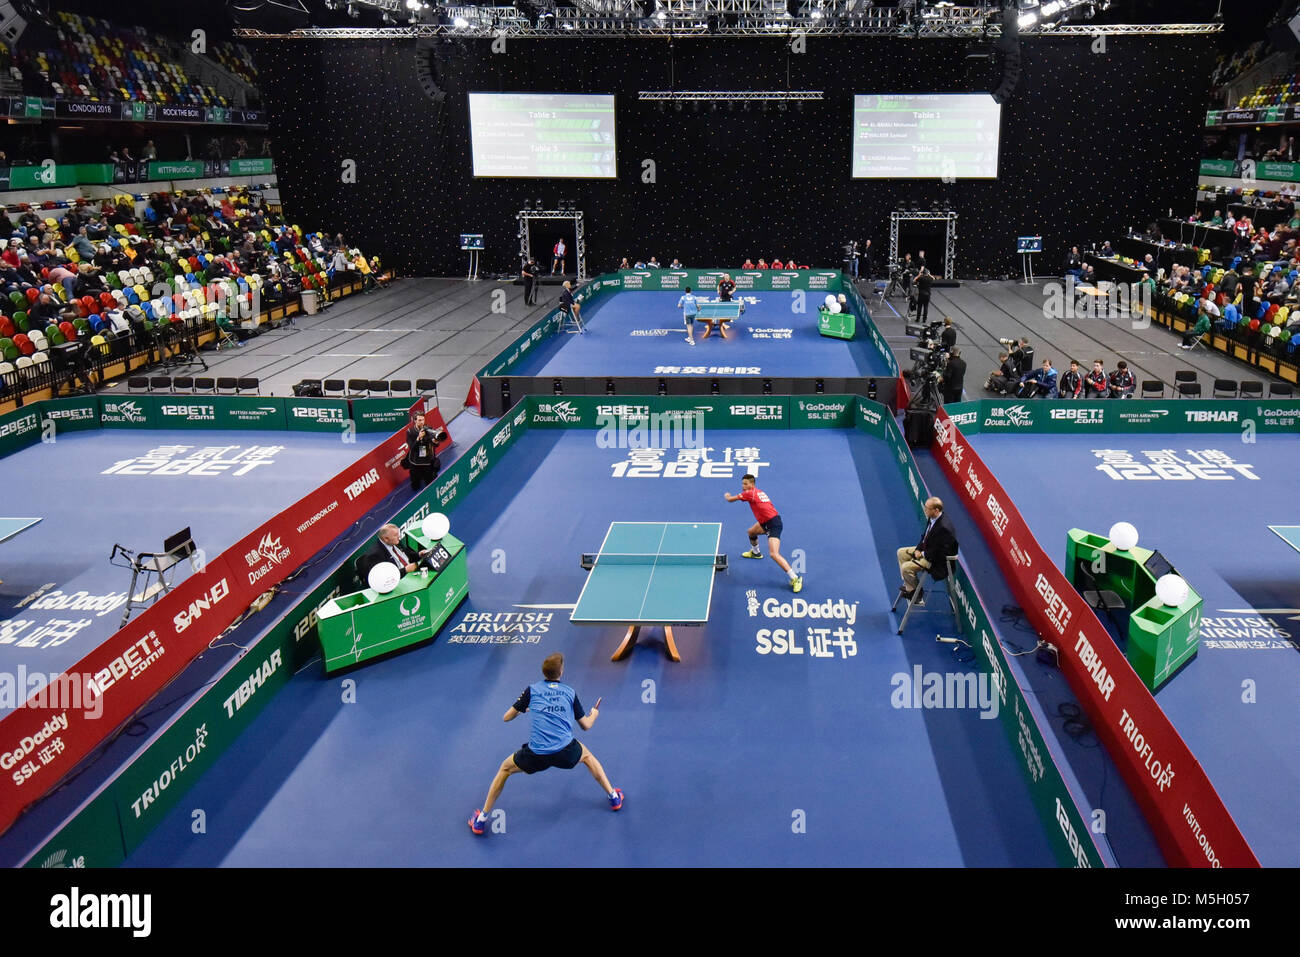 London, UK. 23 February 2018. A general view of table tennis tables during  the preliminary rounds at the ITTF Team World Cup London 2018 taking place  at the Copper Box Arena, Queen